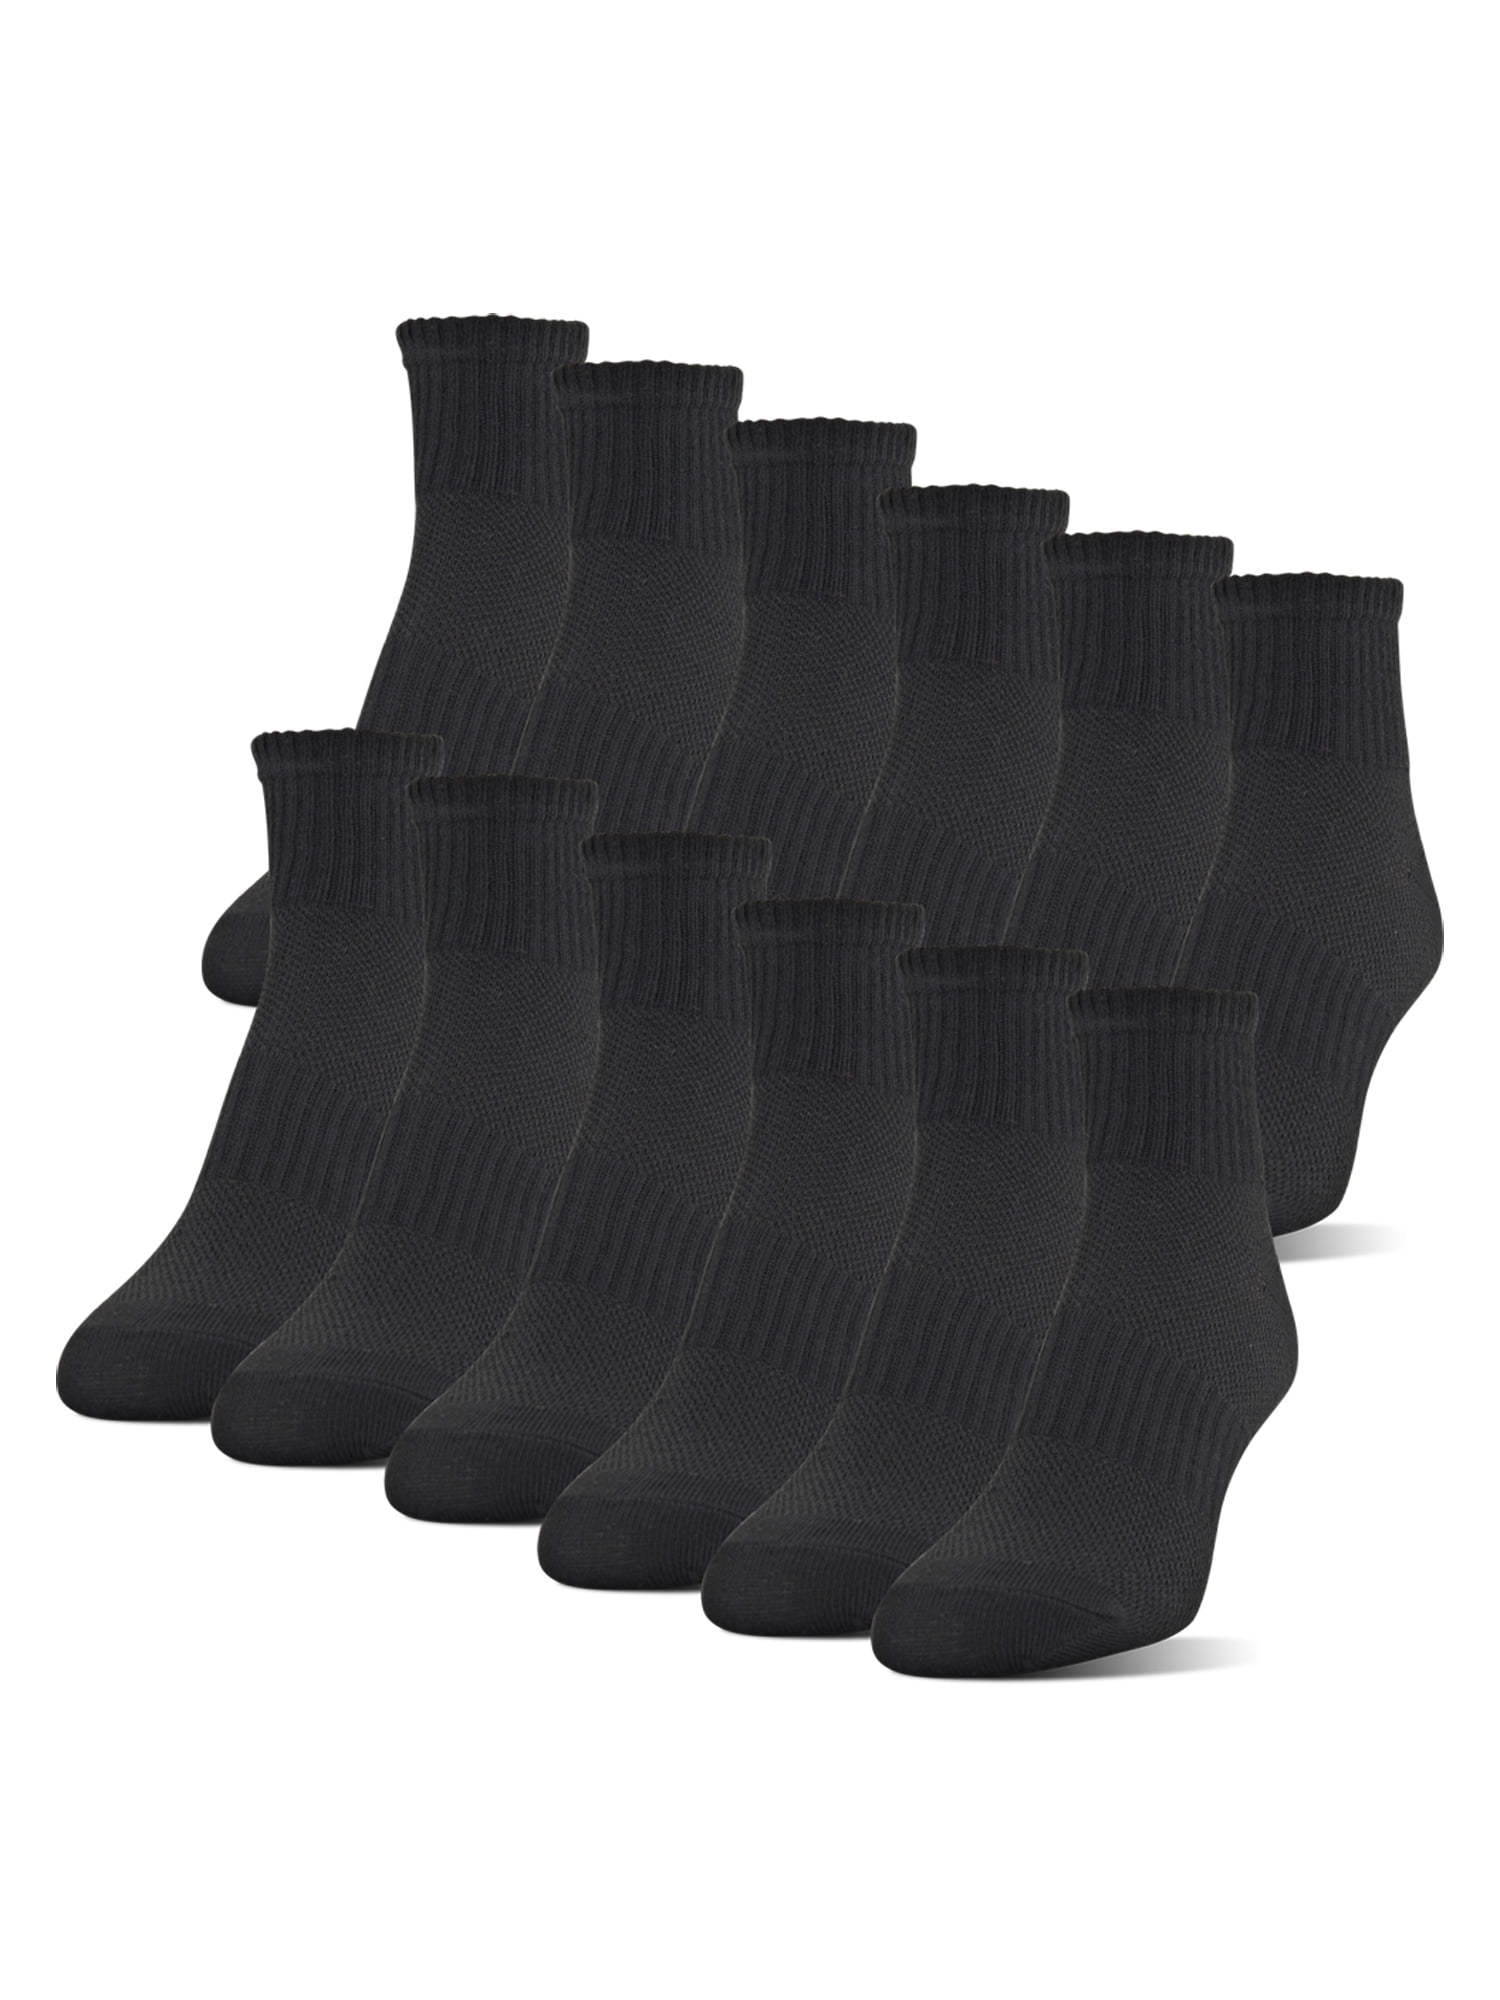 Athletic Works Women's Ultra Thin Ankle Socks, 12 Pairs - Walmart.com